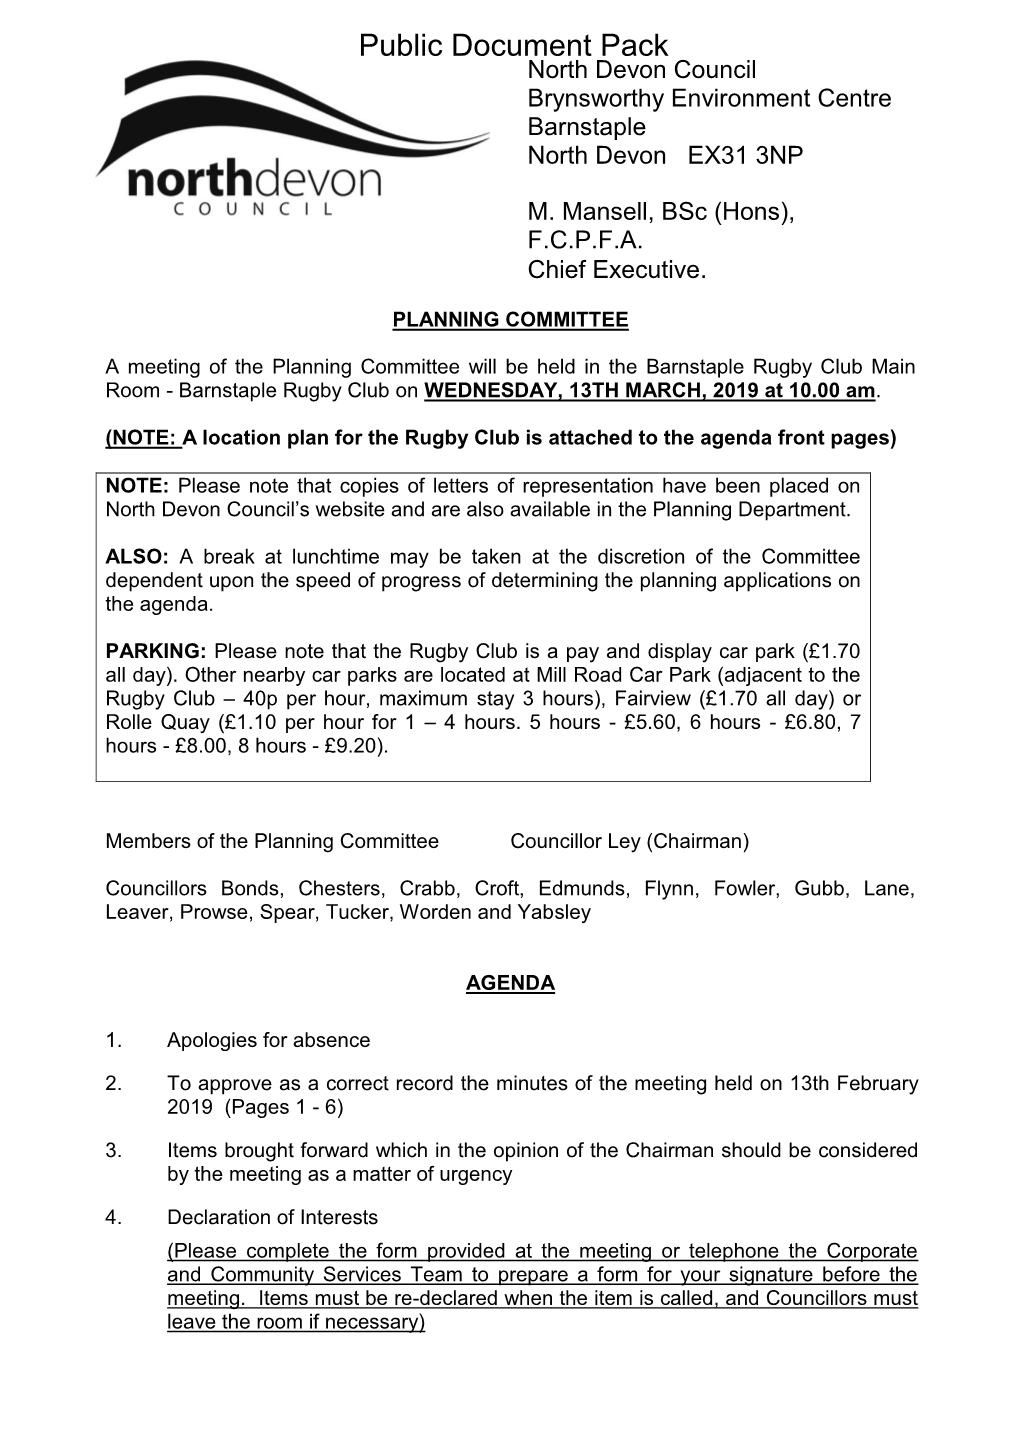 (Public Pack)Agenda Document for Planning Committee, 13/03/2019 10:00